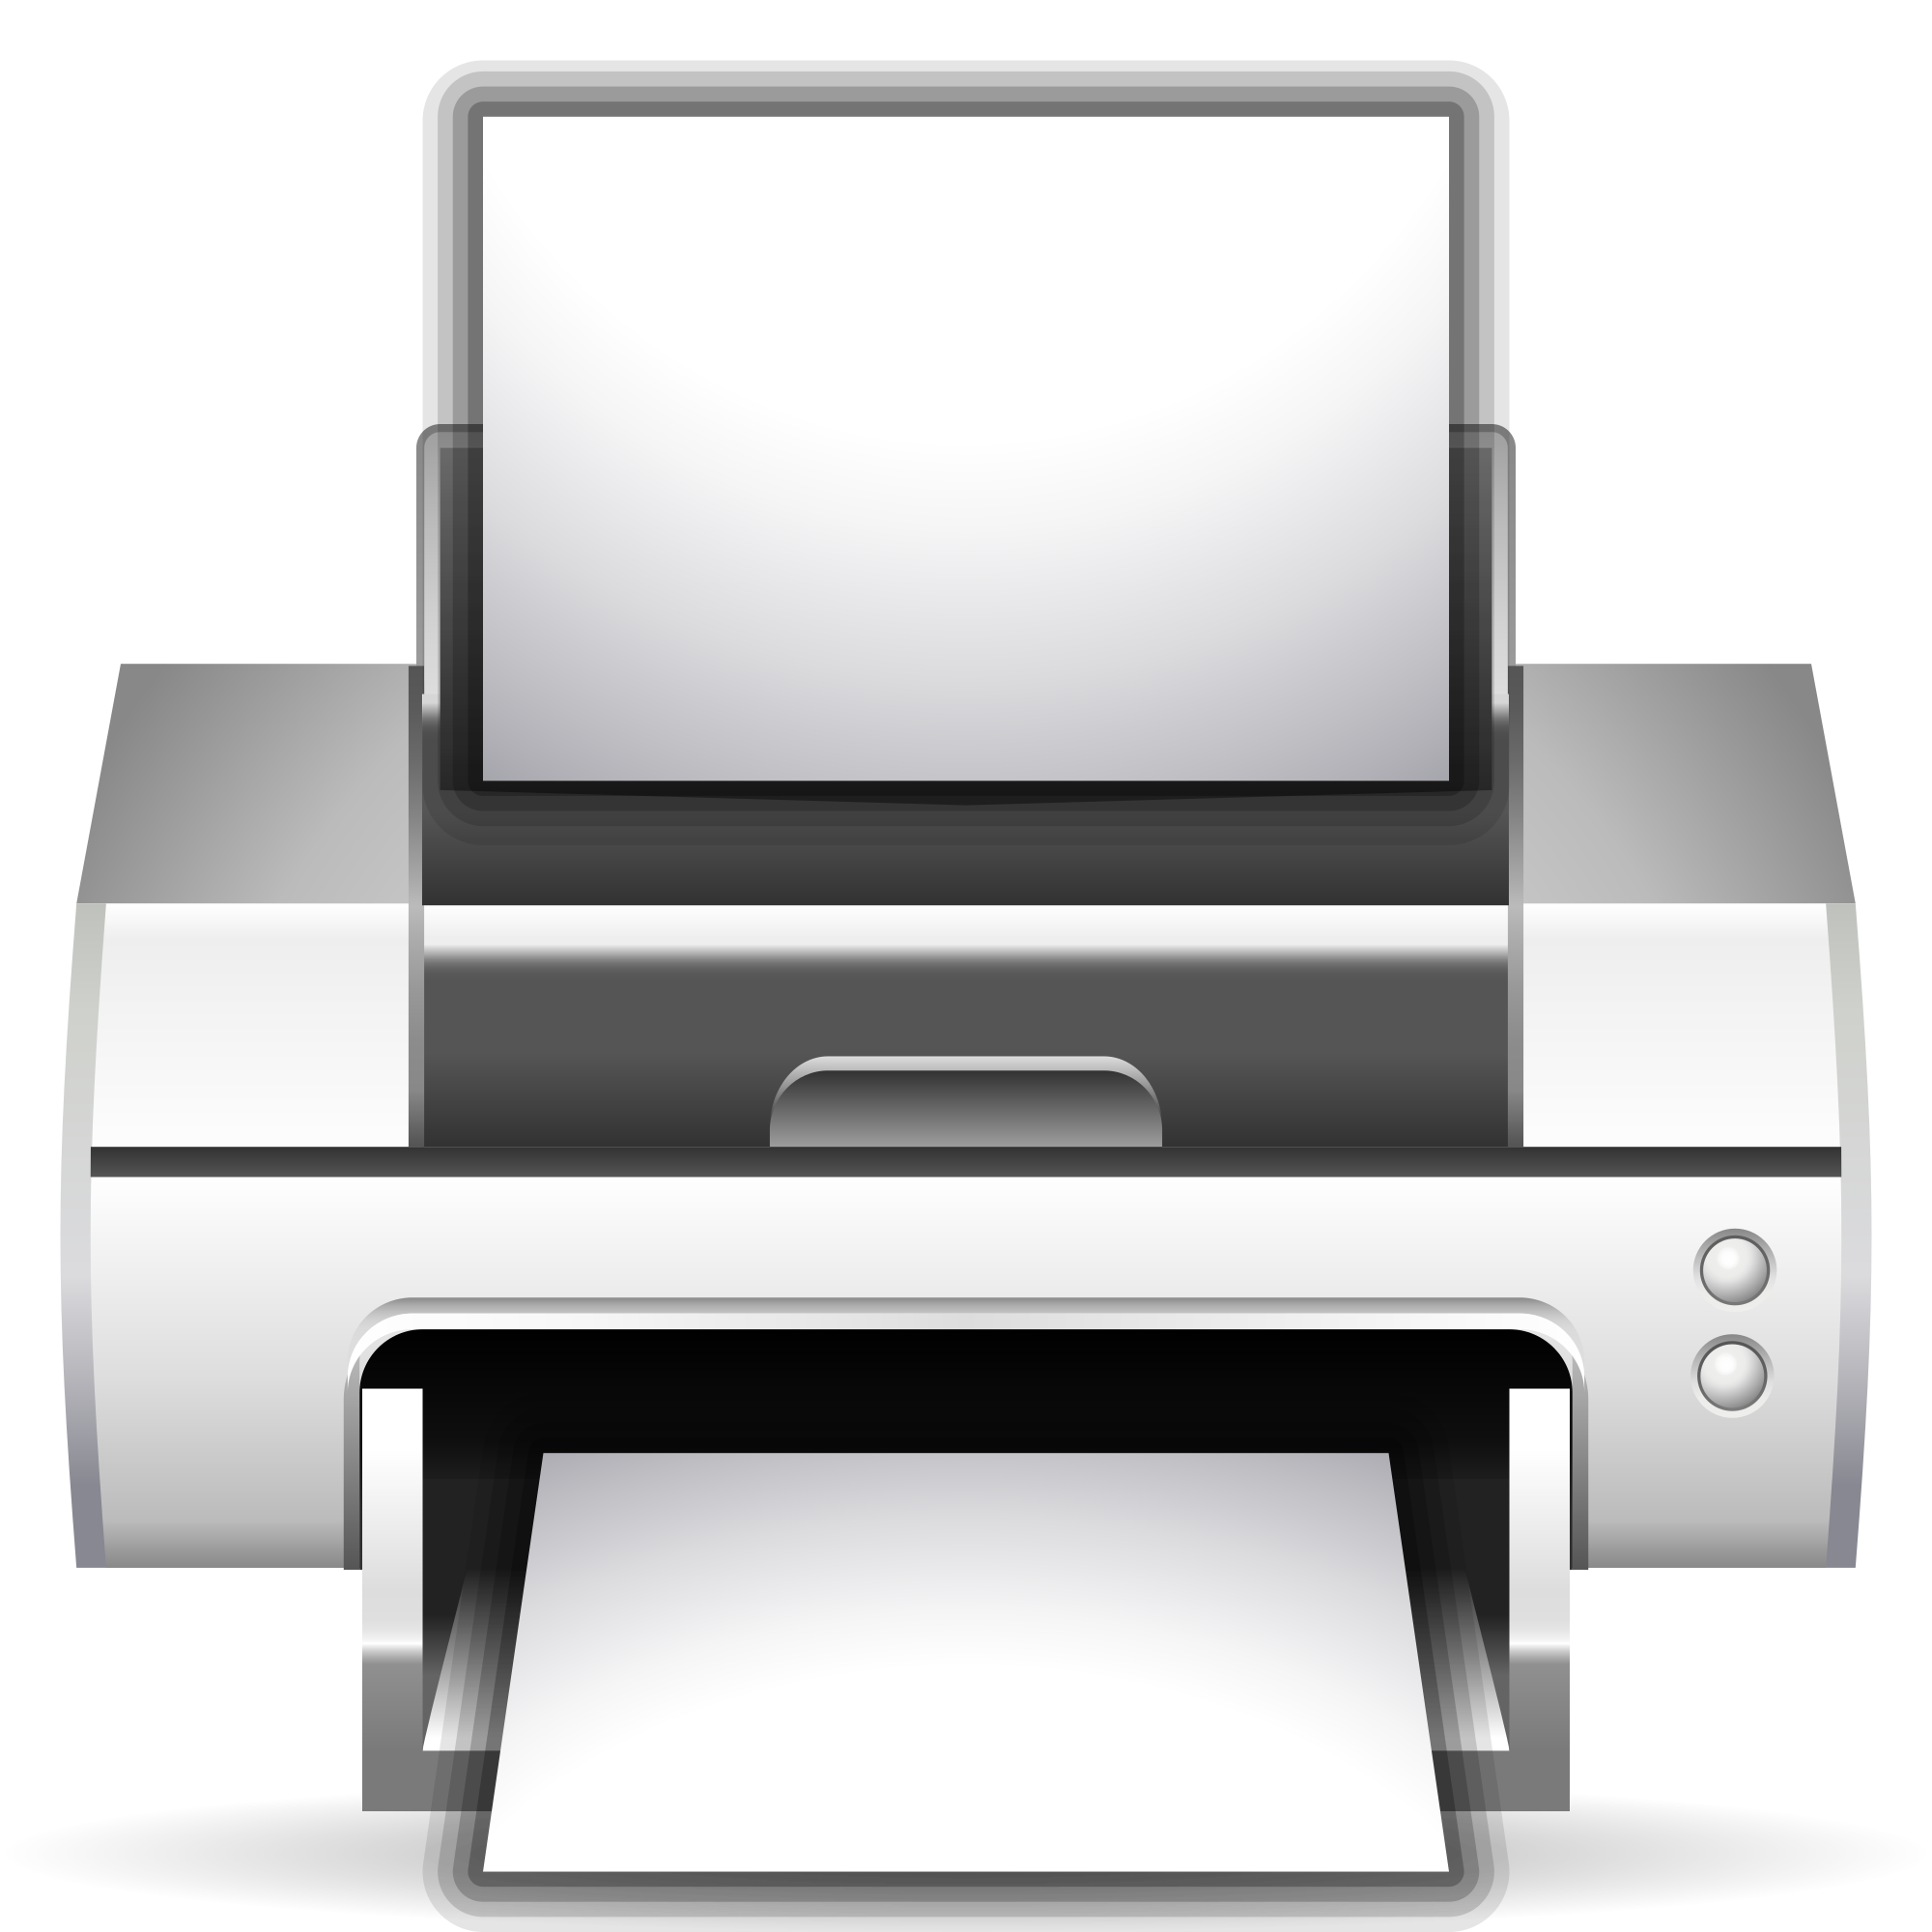 Printing png files. File oxygen actions document